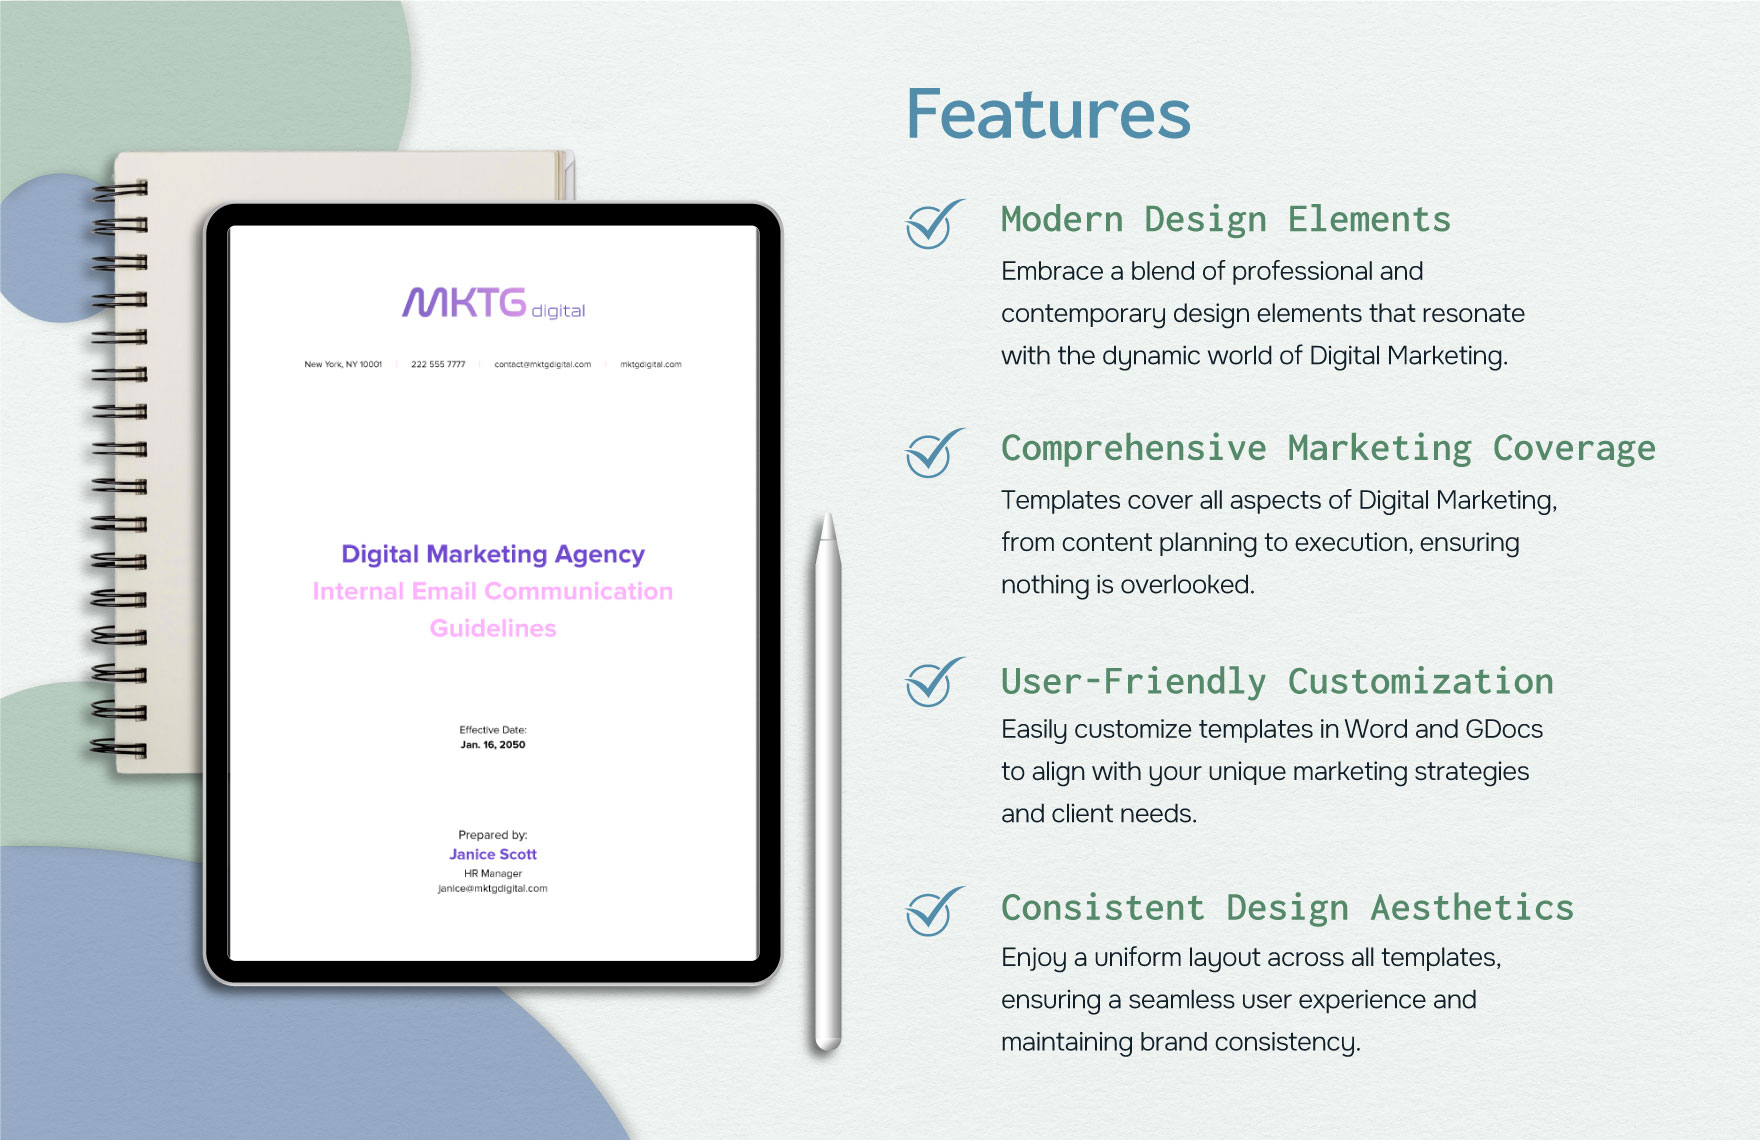 Digital Marketing Agency Internal Email Communication Guidelines Template